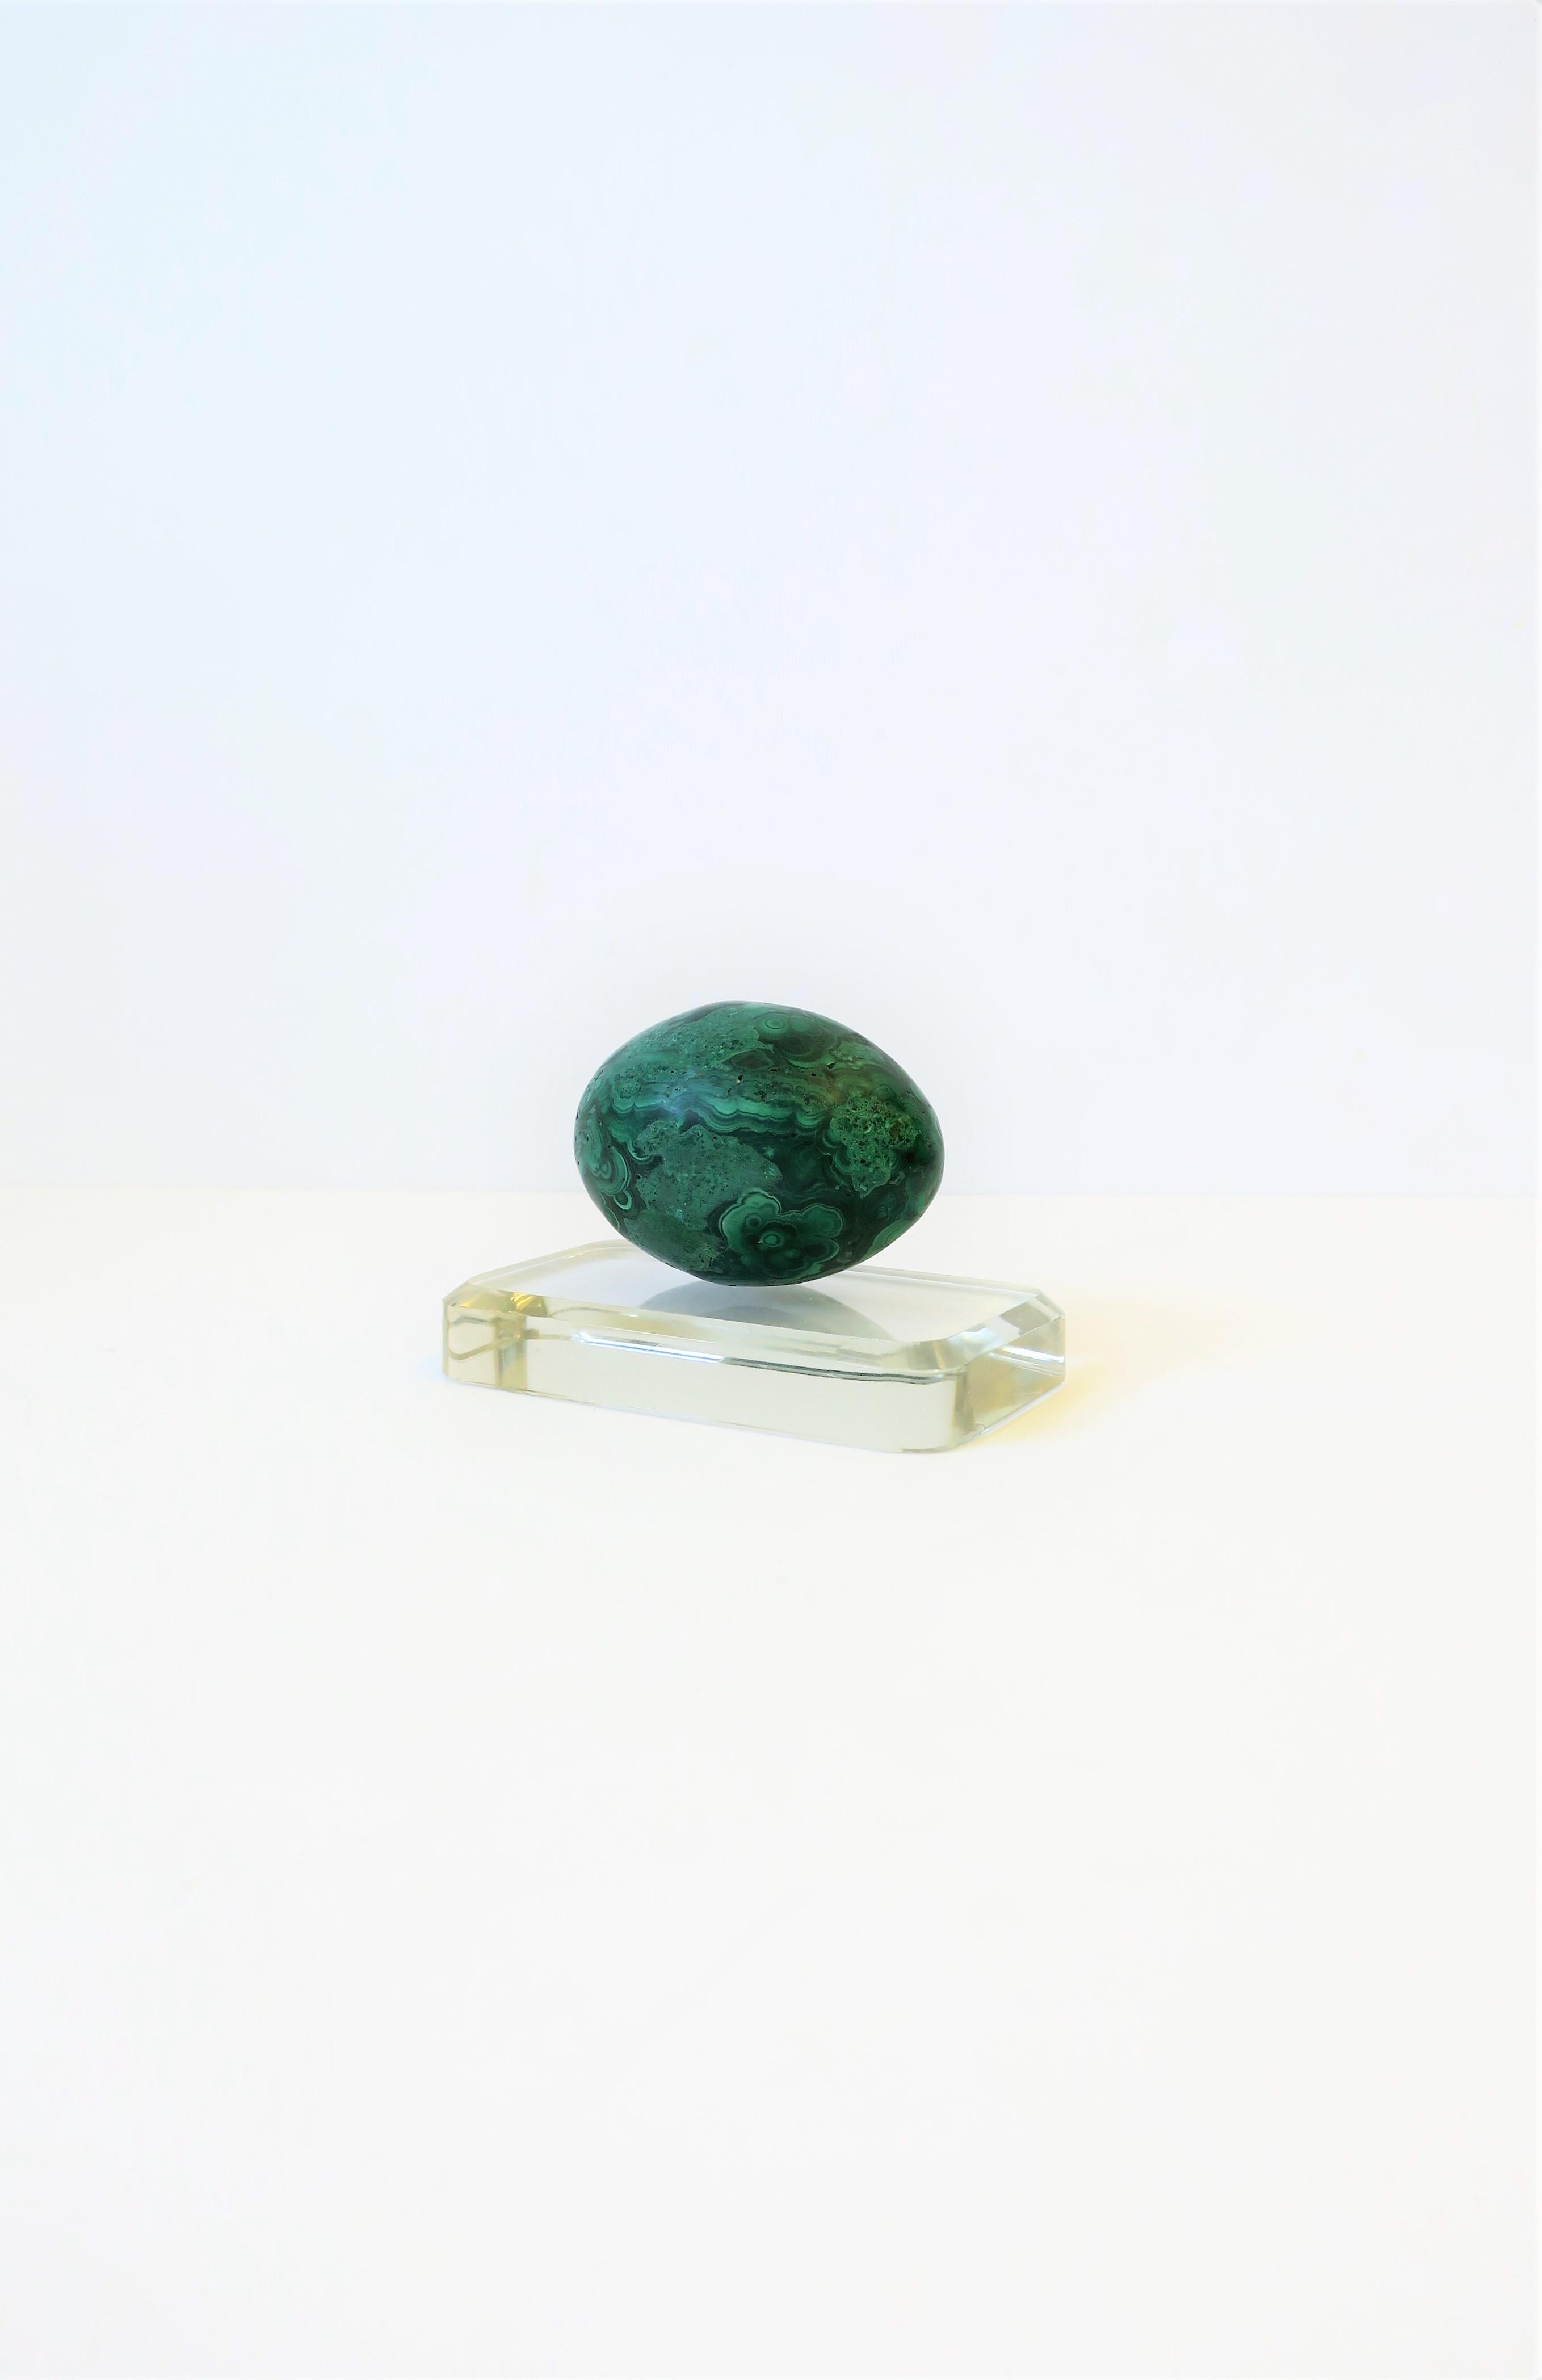 Polished Green Malachite Sculpture and Crystal Plinth Decorative Object